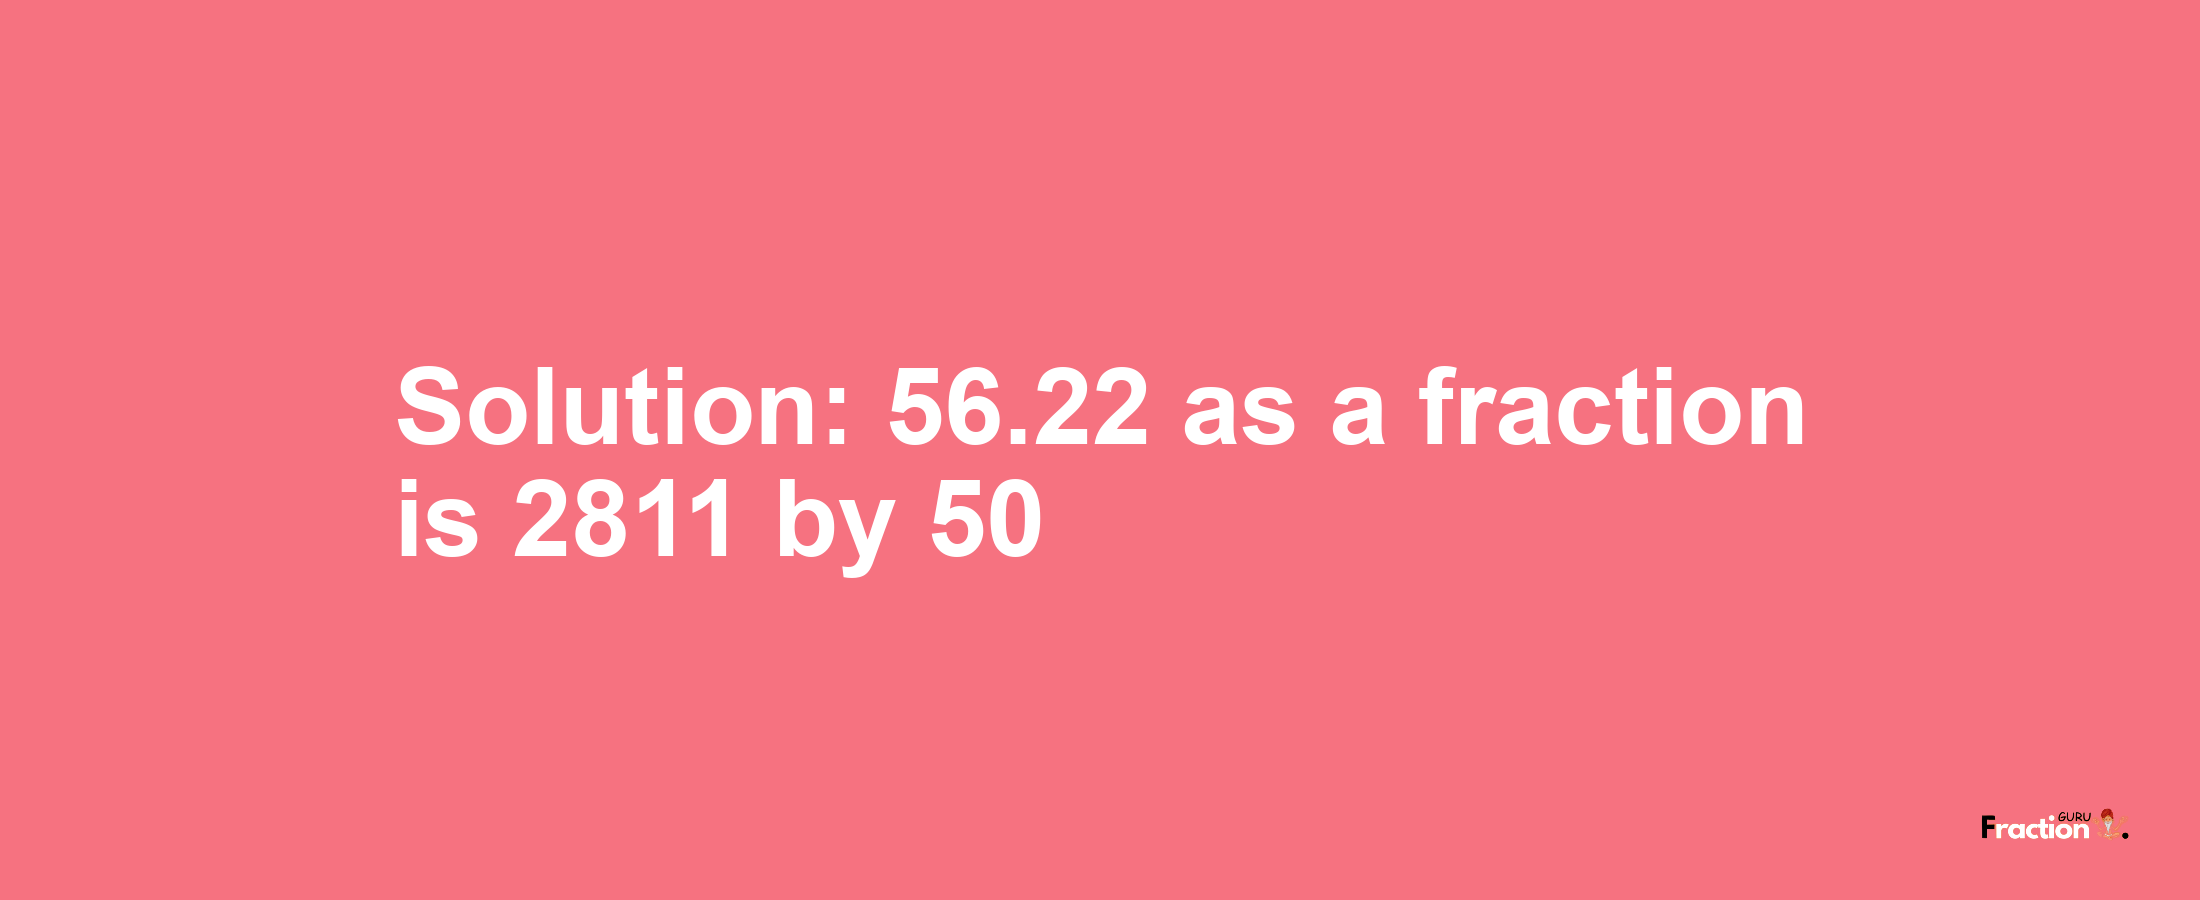 Solution:56.22 as a fraction is 2811/50